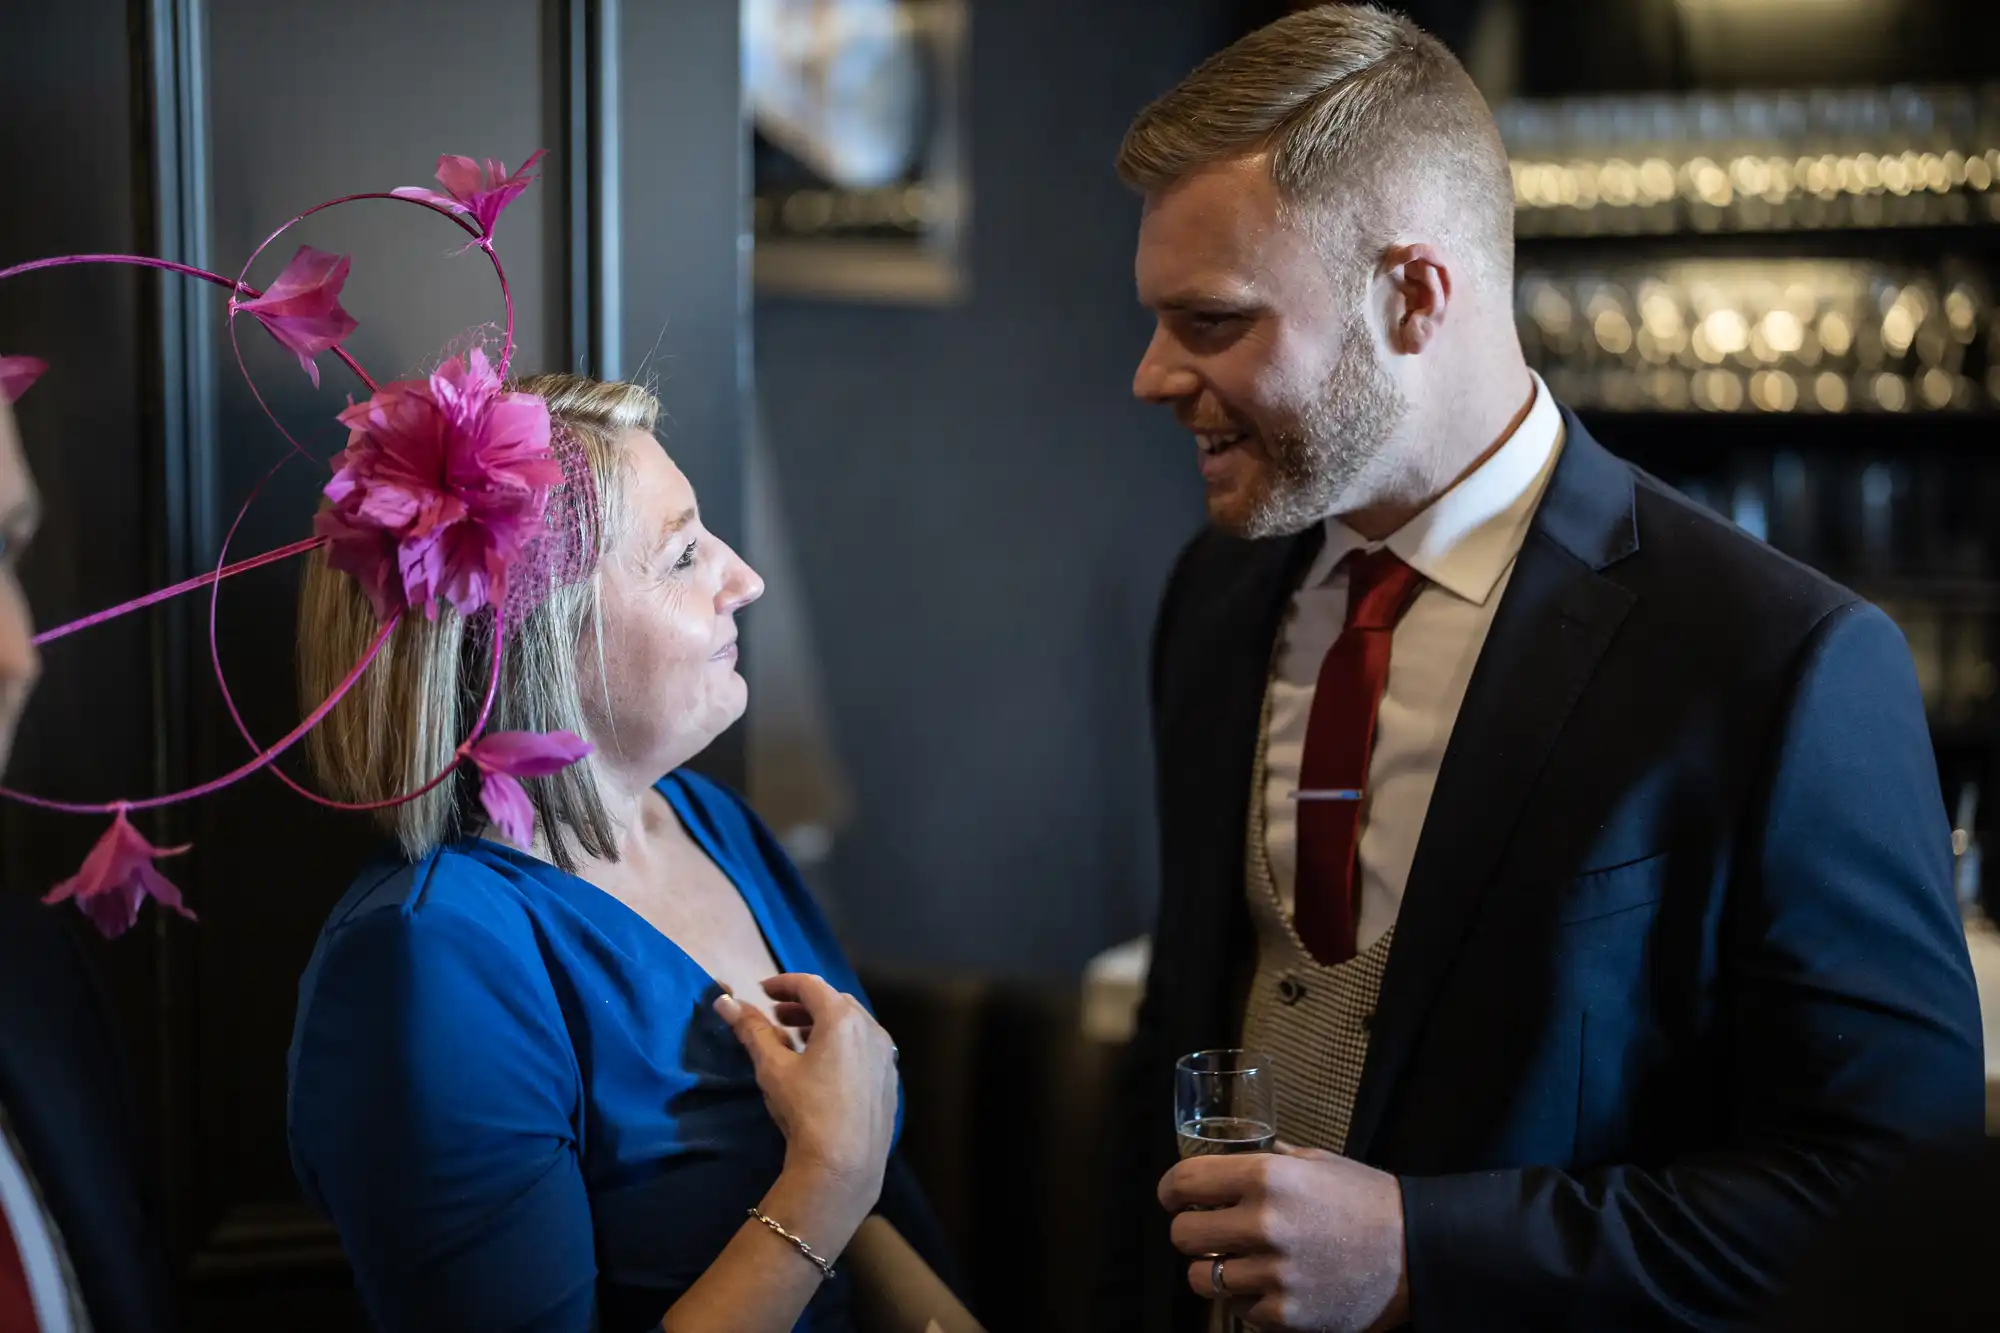 A woman wearing a blue dress and pink fascinator talks with a man in a dark suit and red tie at an indoor event. Both appear to be engaged in conversation, with the woman gesturing towards herself.